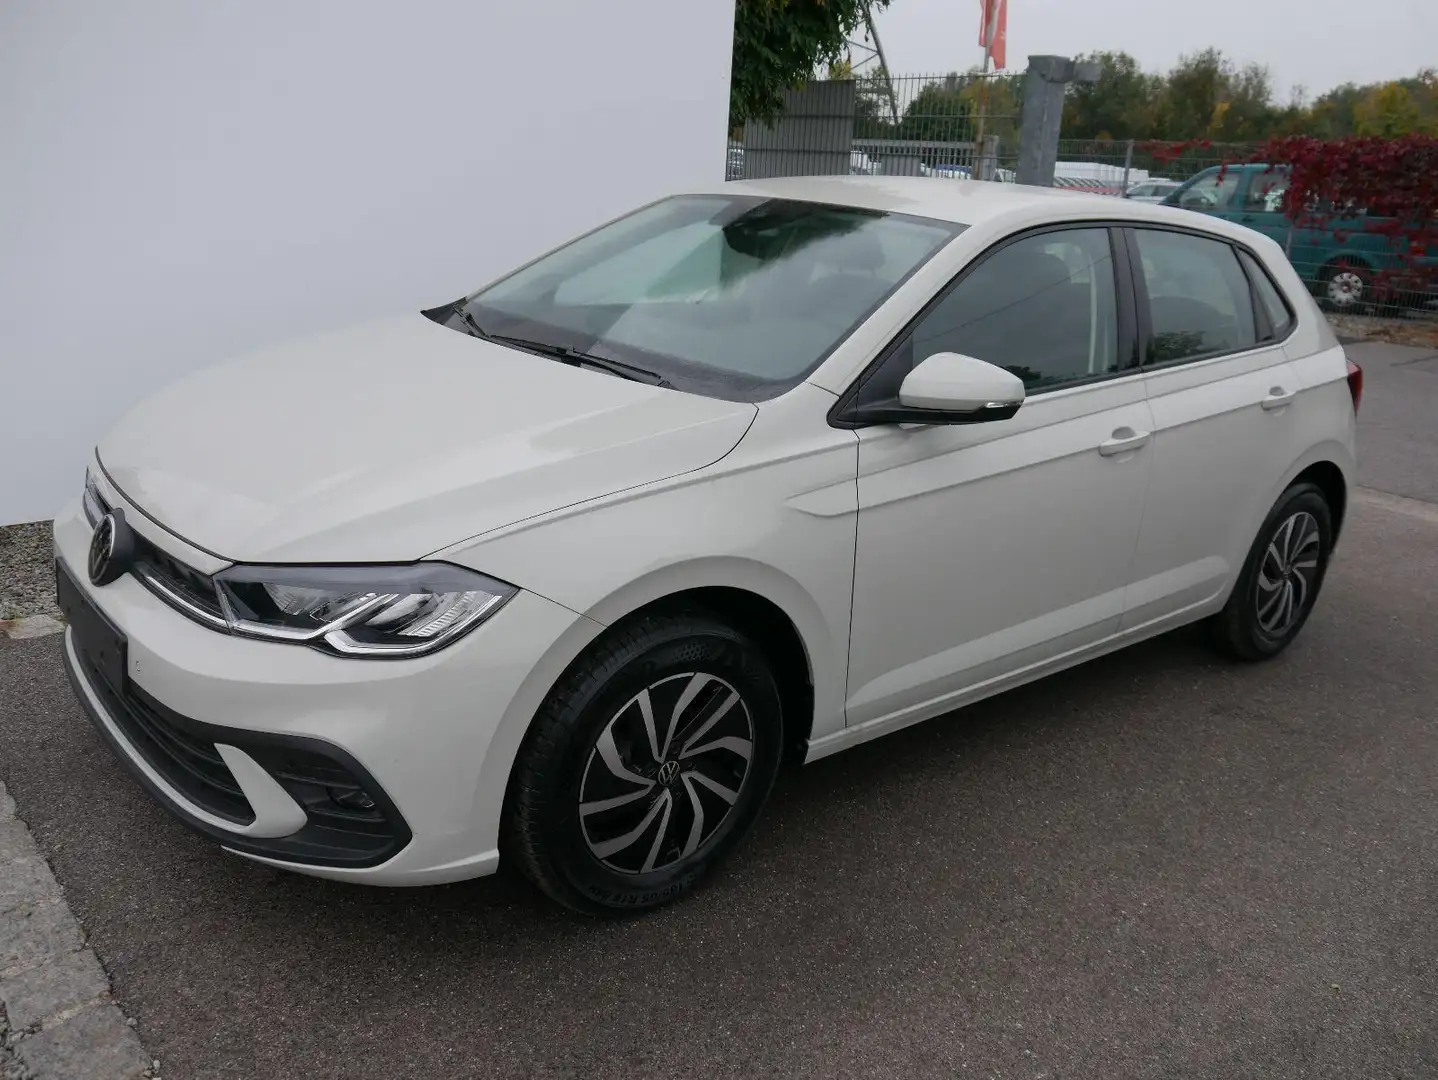 Volkswagen Polo LIFE 1.0 TSI DSG * APP-CONNECT PDC SHZ LED DAB ... Gris - 1